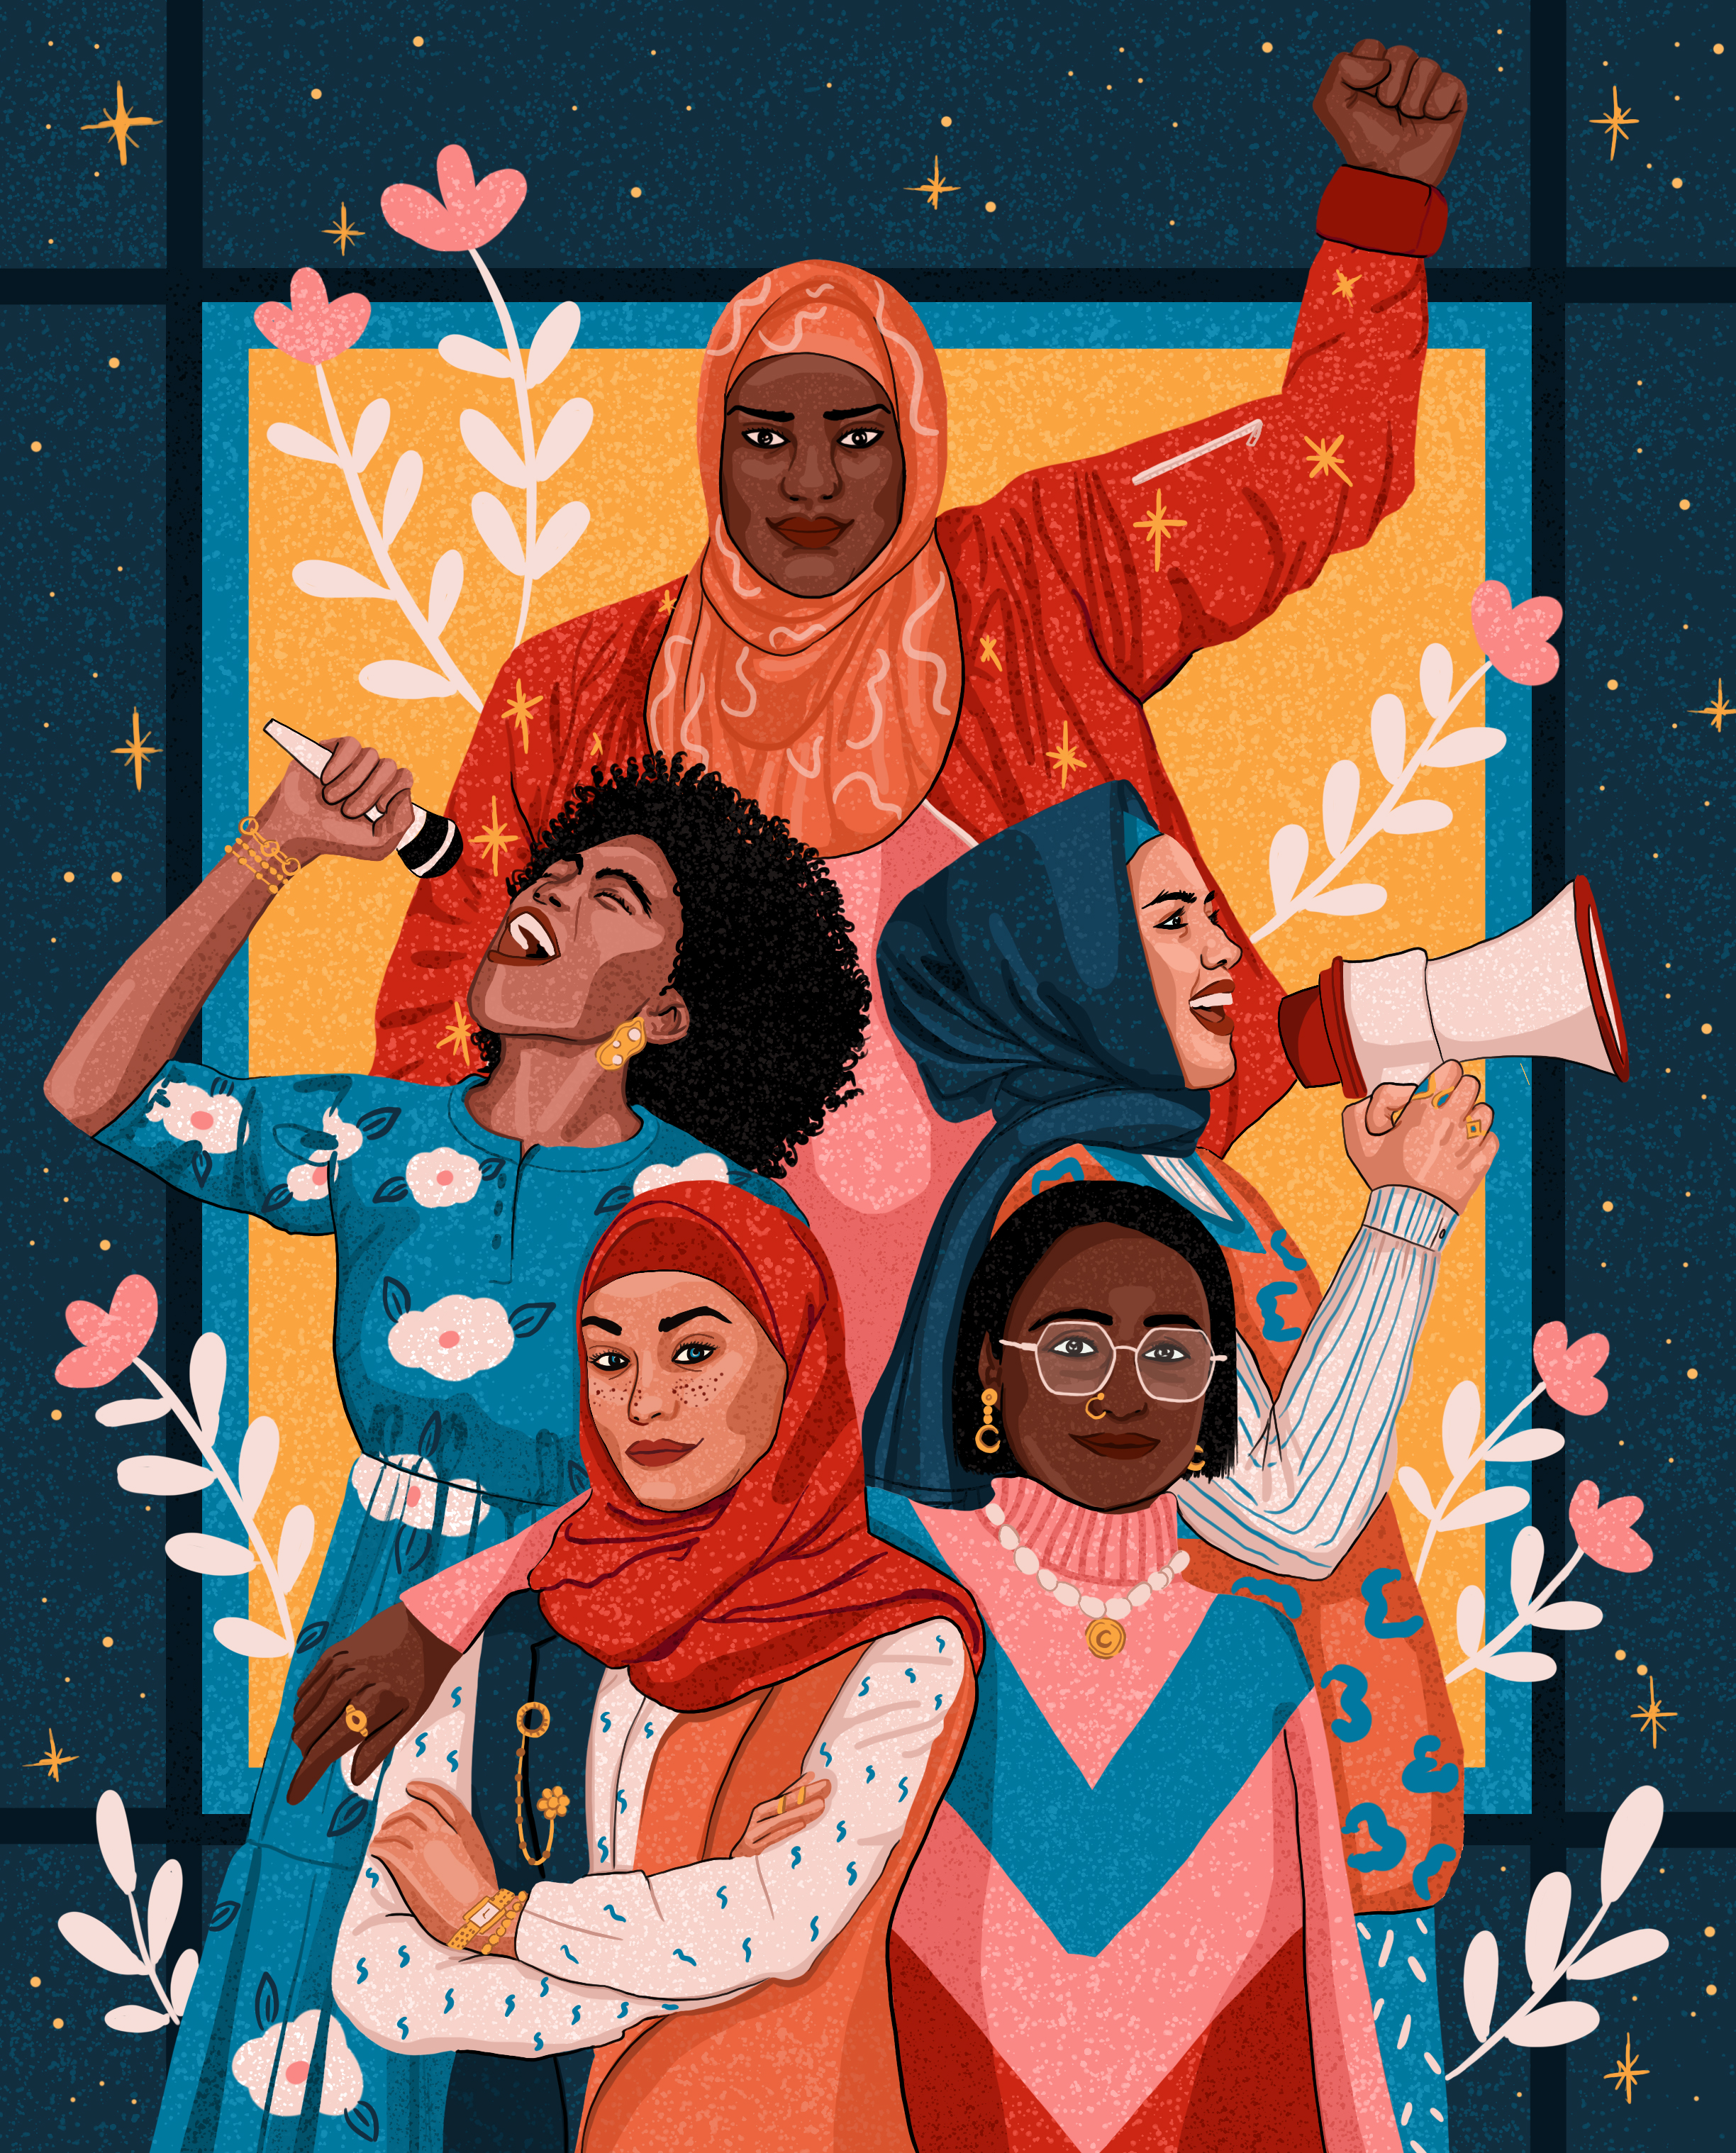 Illustration of a diverse group of five Muslim women:Illustration of a diverse group of five Muslim women: A hijabi activist, wearing an orange scarf and a red jacket with her fist up, looking confidently straight ahead. A singer with afro hair wearing a blue floral dress and passionately singing while holding a mic up. A hijabi activist wearing a blue scarf and speaking into a megaphone. A hijabi woman wearing a red scarf and looking confidently ahead with crossed hands. A woman with short black hair, wearing glasses and nose piercings, with her hands on the shoulders of the woman to her right, smiling while looking ahead. A hijabi activist, wearing an orange scarf and a red jacket with her fist up, looking confidently straight ahead. A singer with afro hair wearing a blue floral dress and passionately singing while holding a mic up. A hijabi activist wearing a blue scarf and speaking into a megaphone. A hijabi woman wearing a red scarf and looking confidently ahead with crossed hands. A woman with short black hair, wearing glasses and nose piercings, with her hands on the shoulders of the woman to her right, smiling while looking ahead.